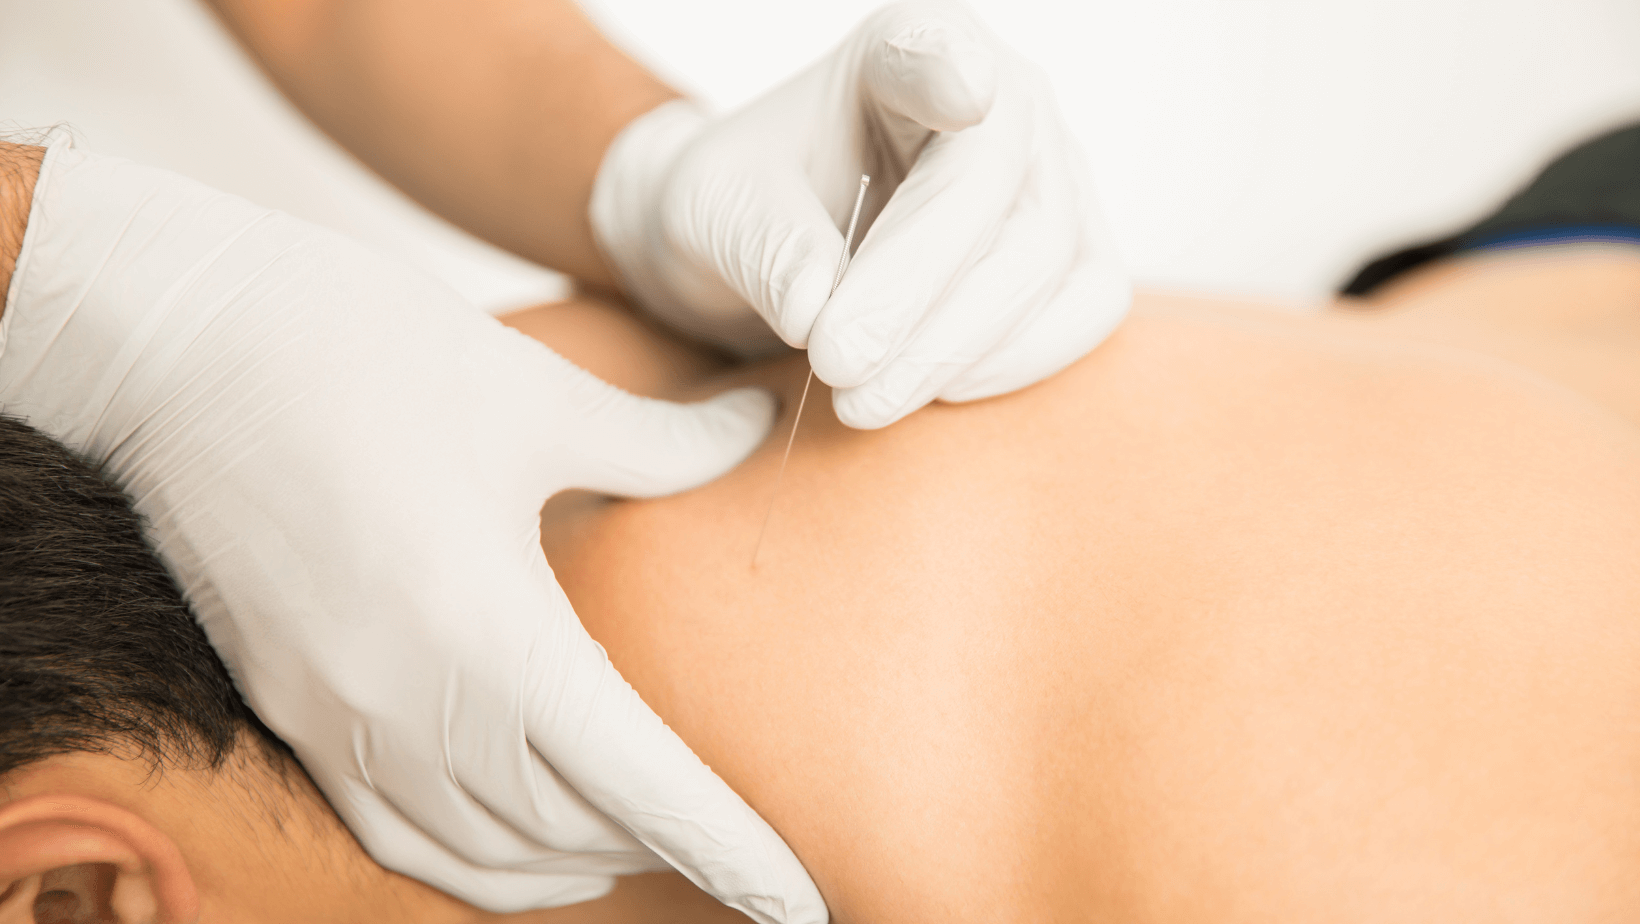 Image of someone receiving a dry needling treatment